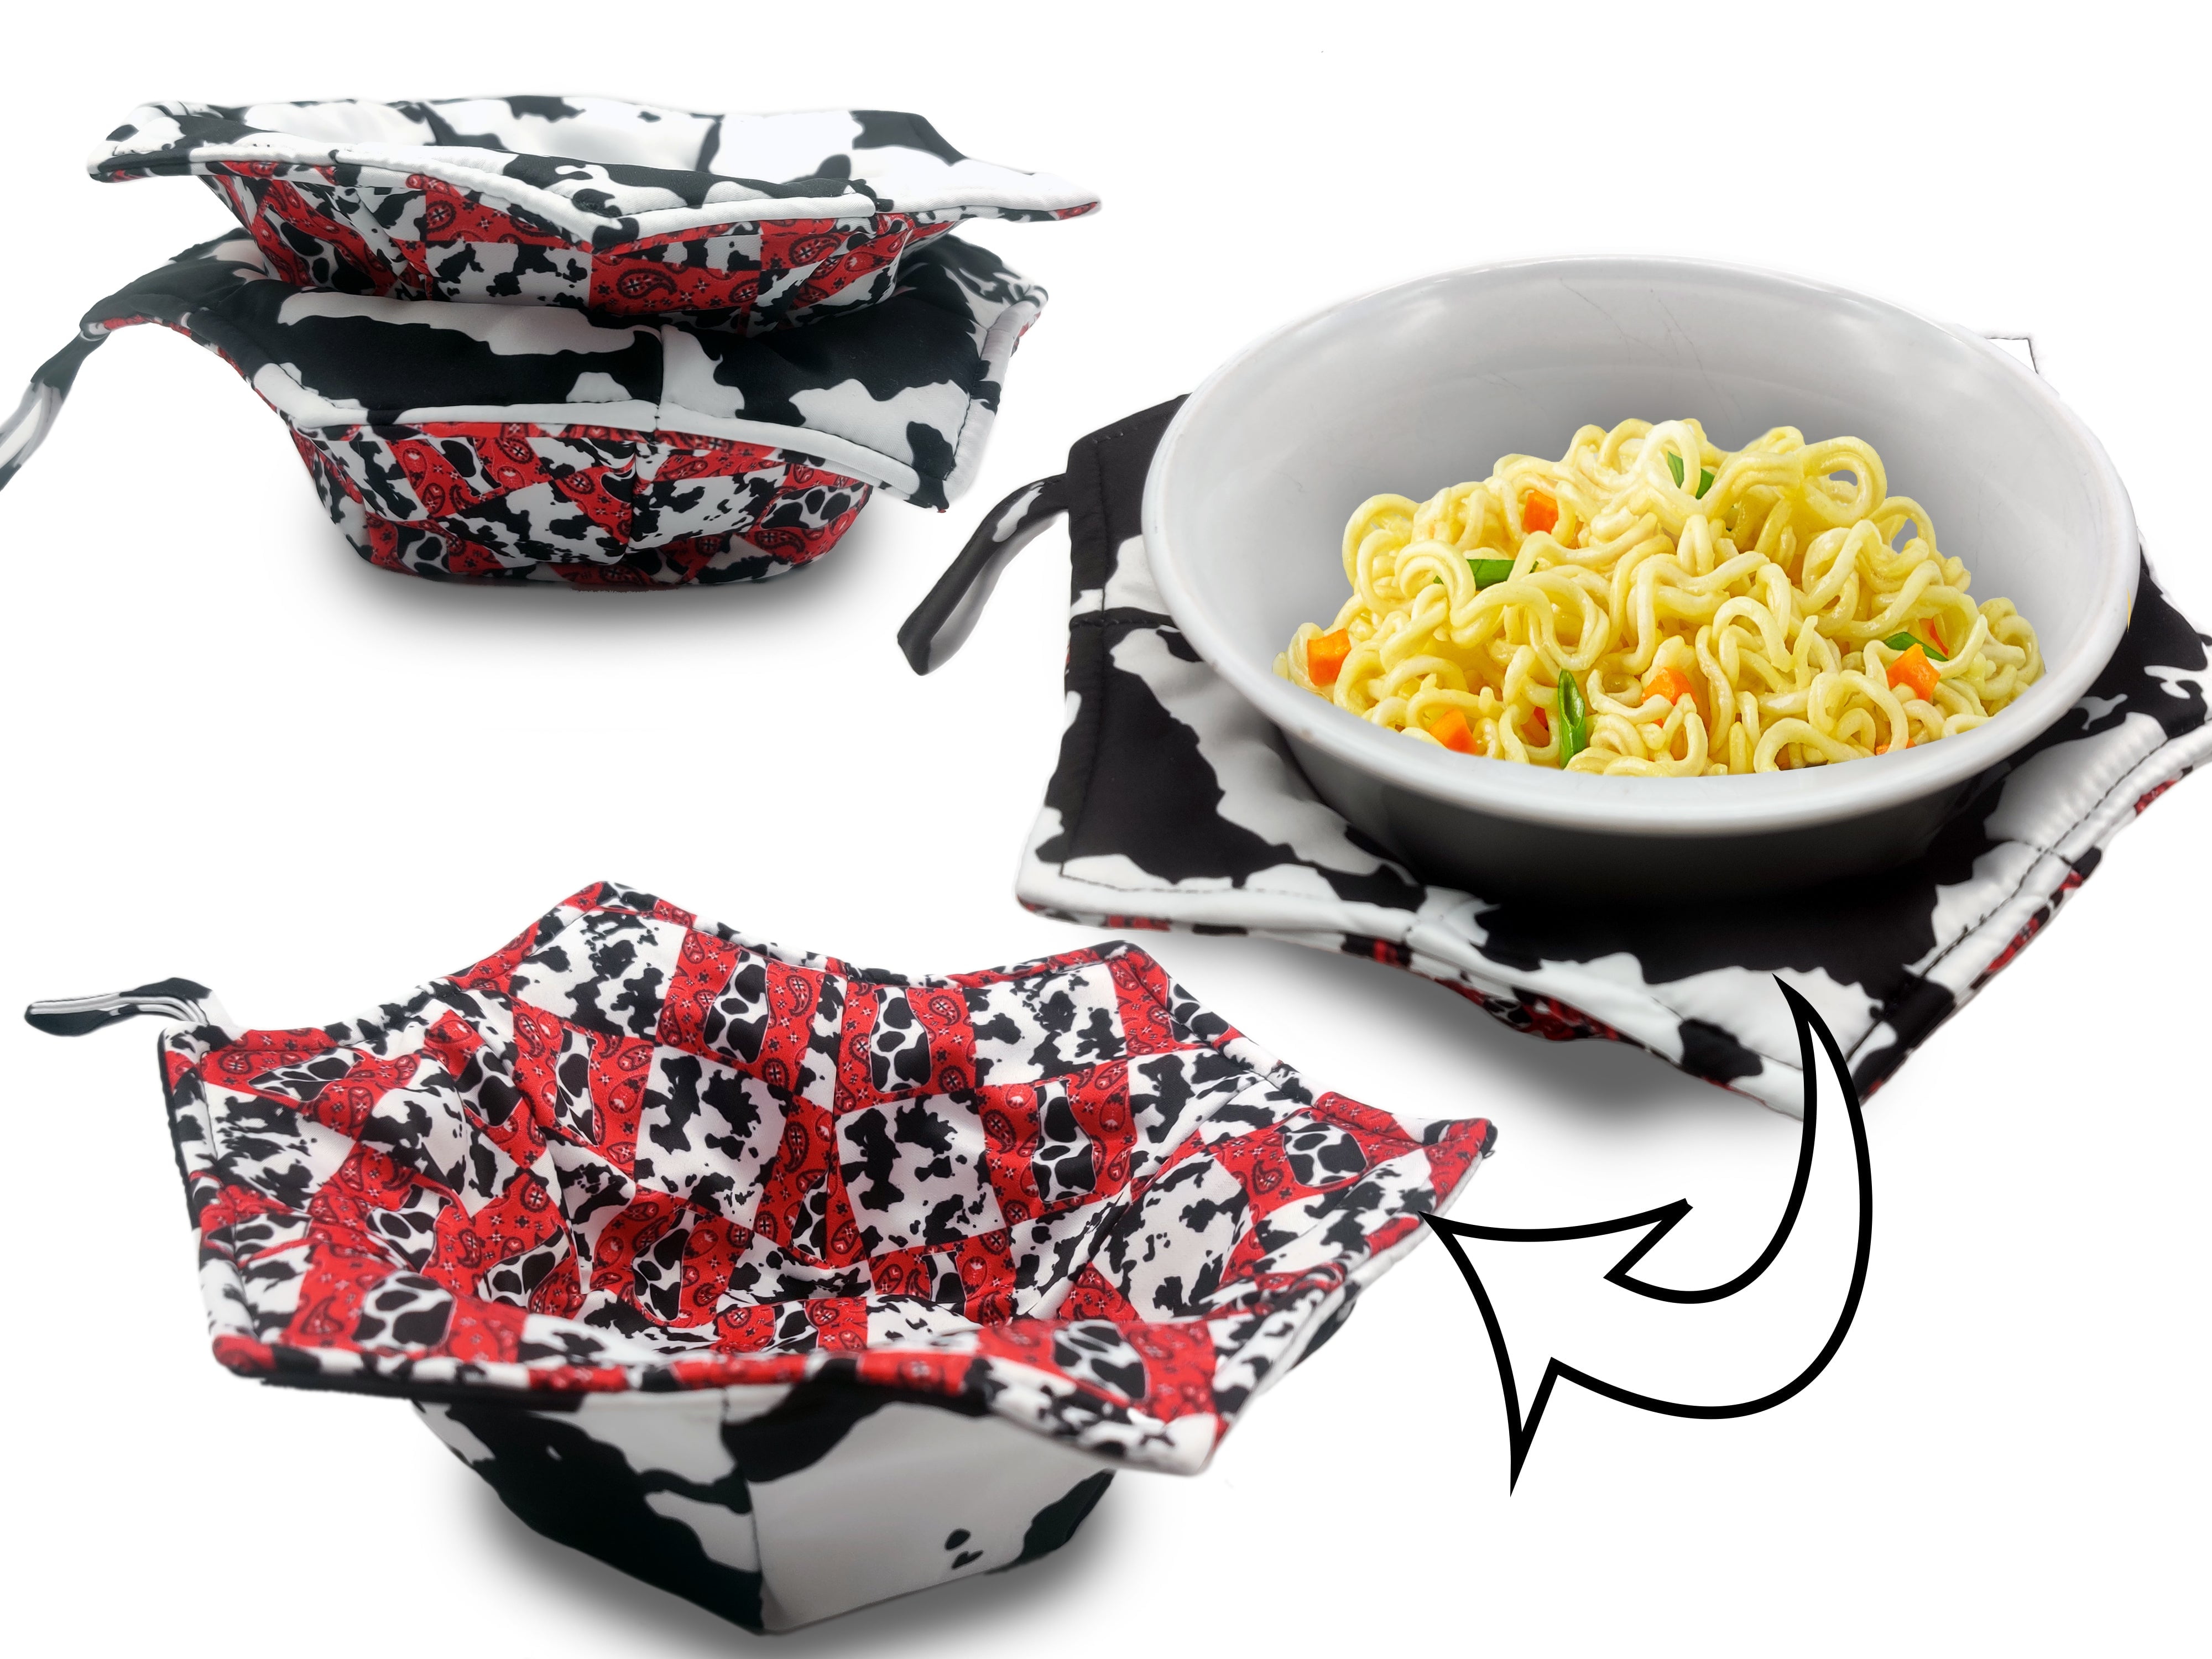 Mepple Microwave Bowl Cozy, Hot Soup Bowl Holders,  Multipurpose Potholders for Hot & Cold Foods, Bowl-shaped Containers,  Essential Kitchen Utensils Gadgets, Set of 2, Red and Green: Soup Bowls